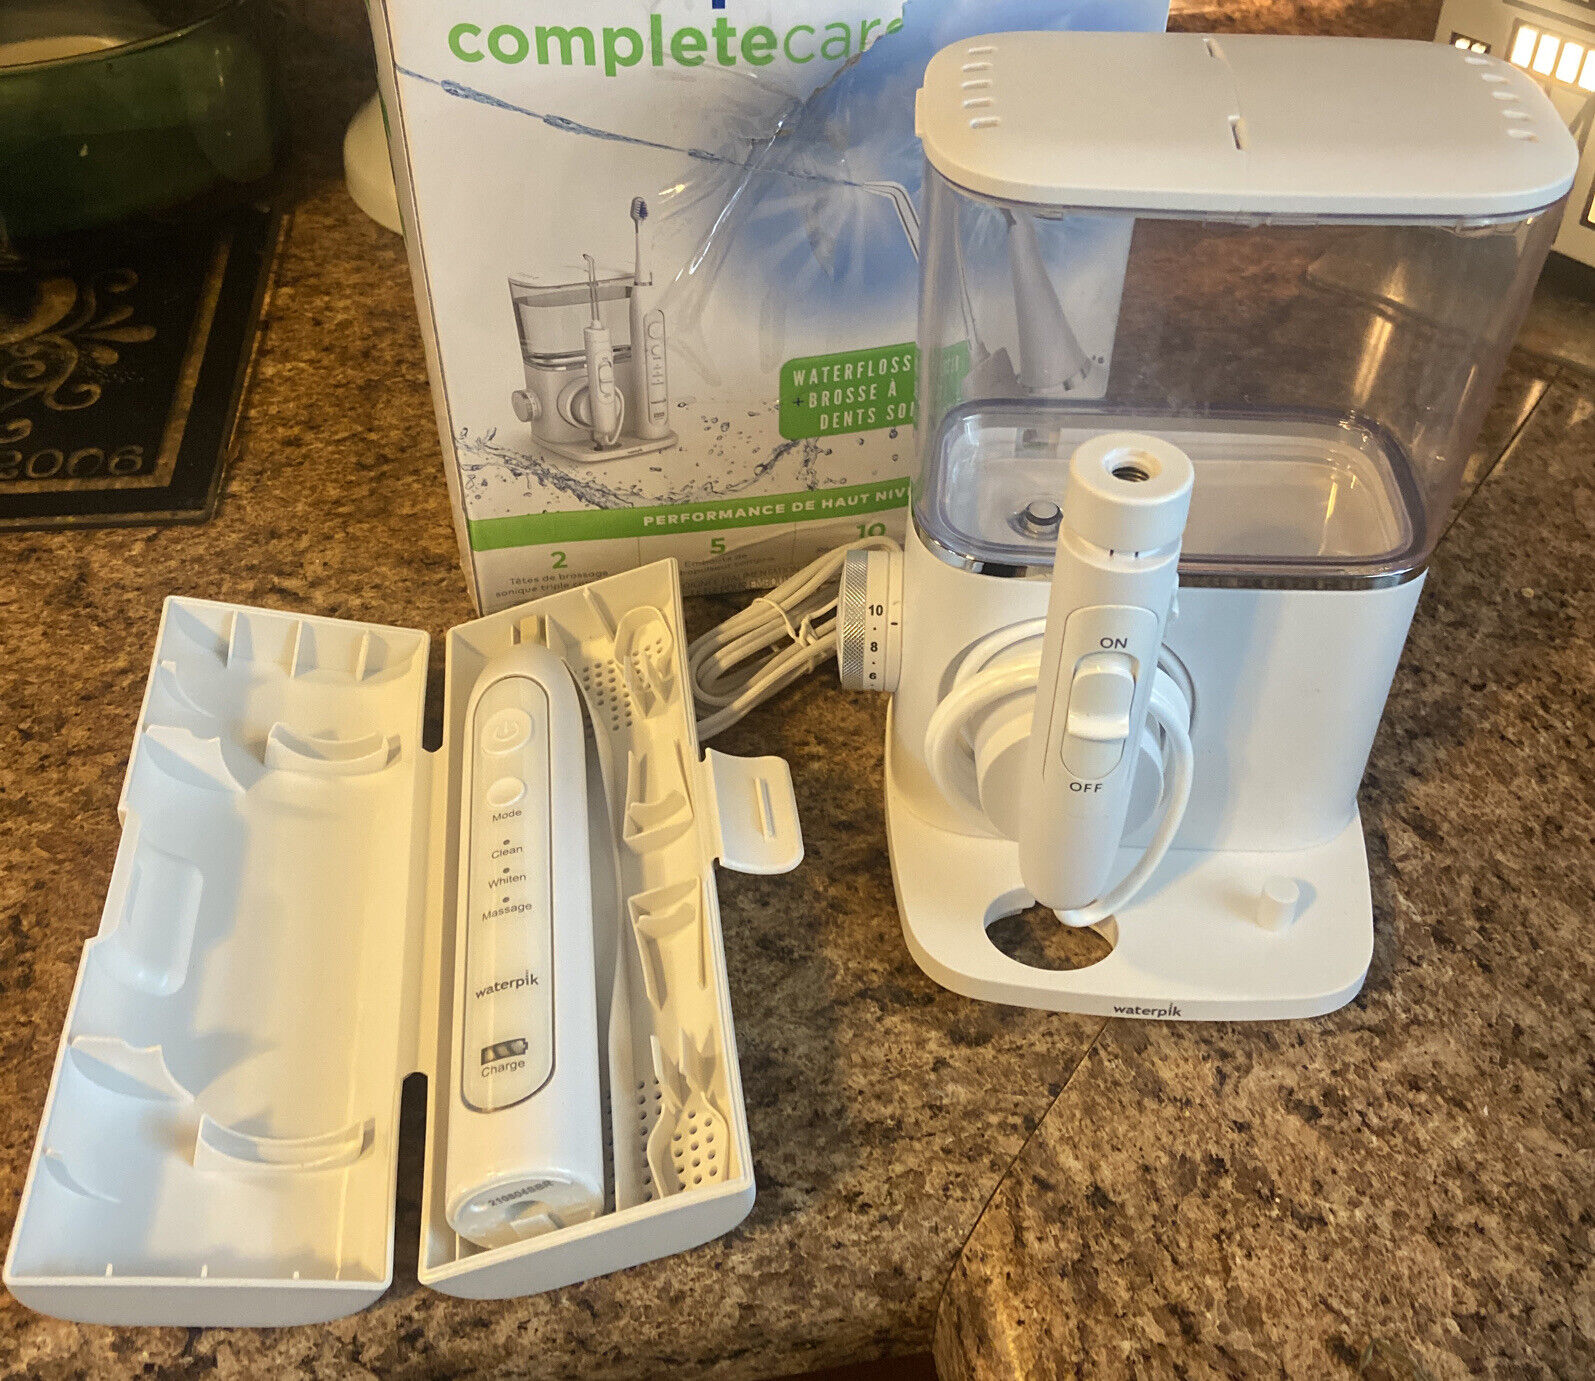 Waterpik famous CC-01 New York Mall Complete Care 9.0 with Sonic Electric Toothbrush